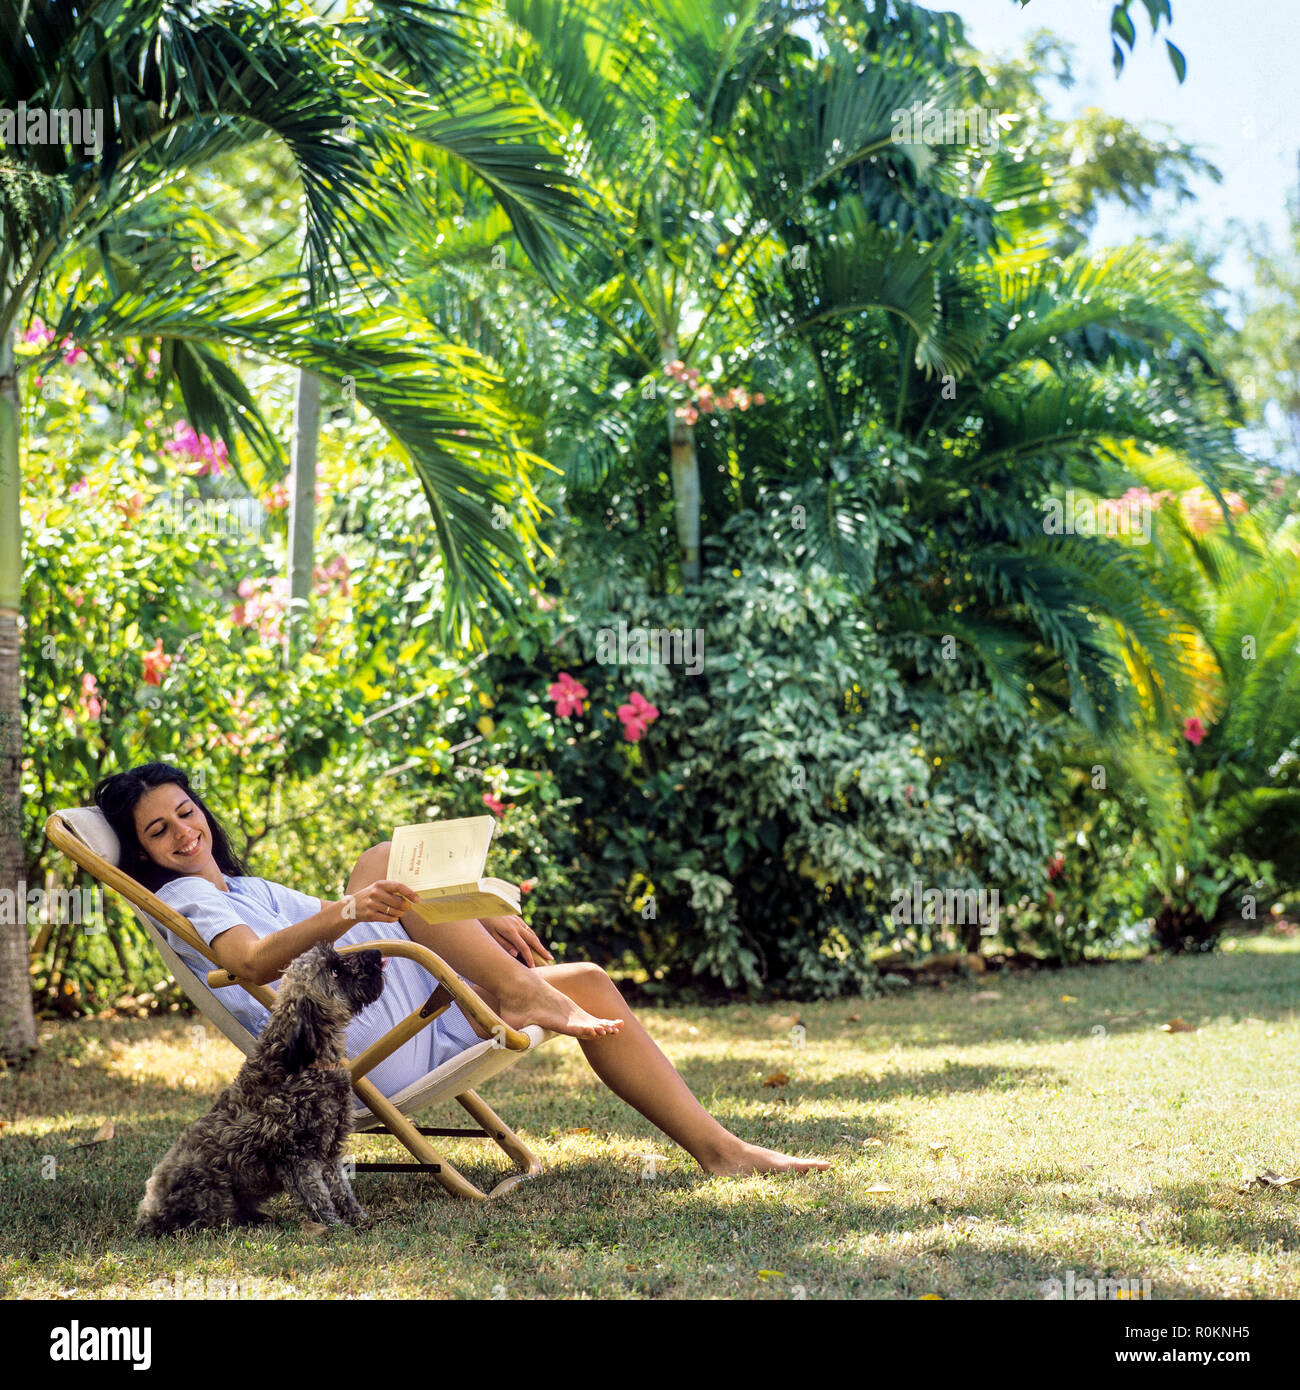 Young woman sitting in deck chair and petting her dog, tropical garden, Guadeloupe, French West Indies, Stock Photo